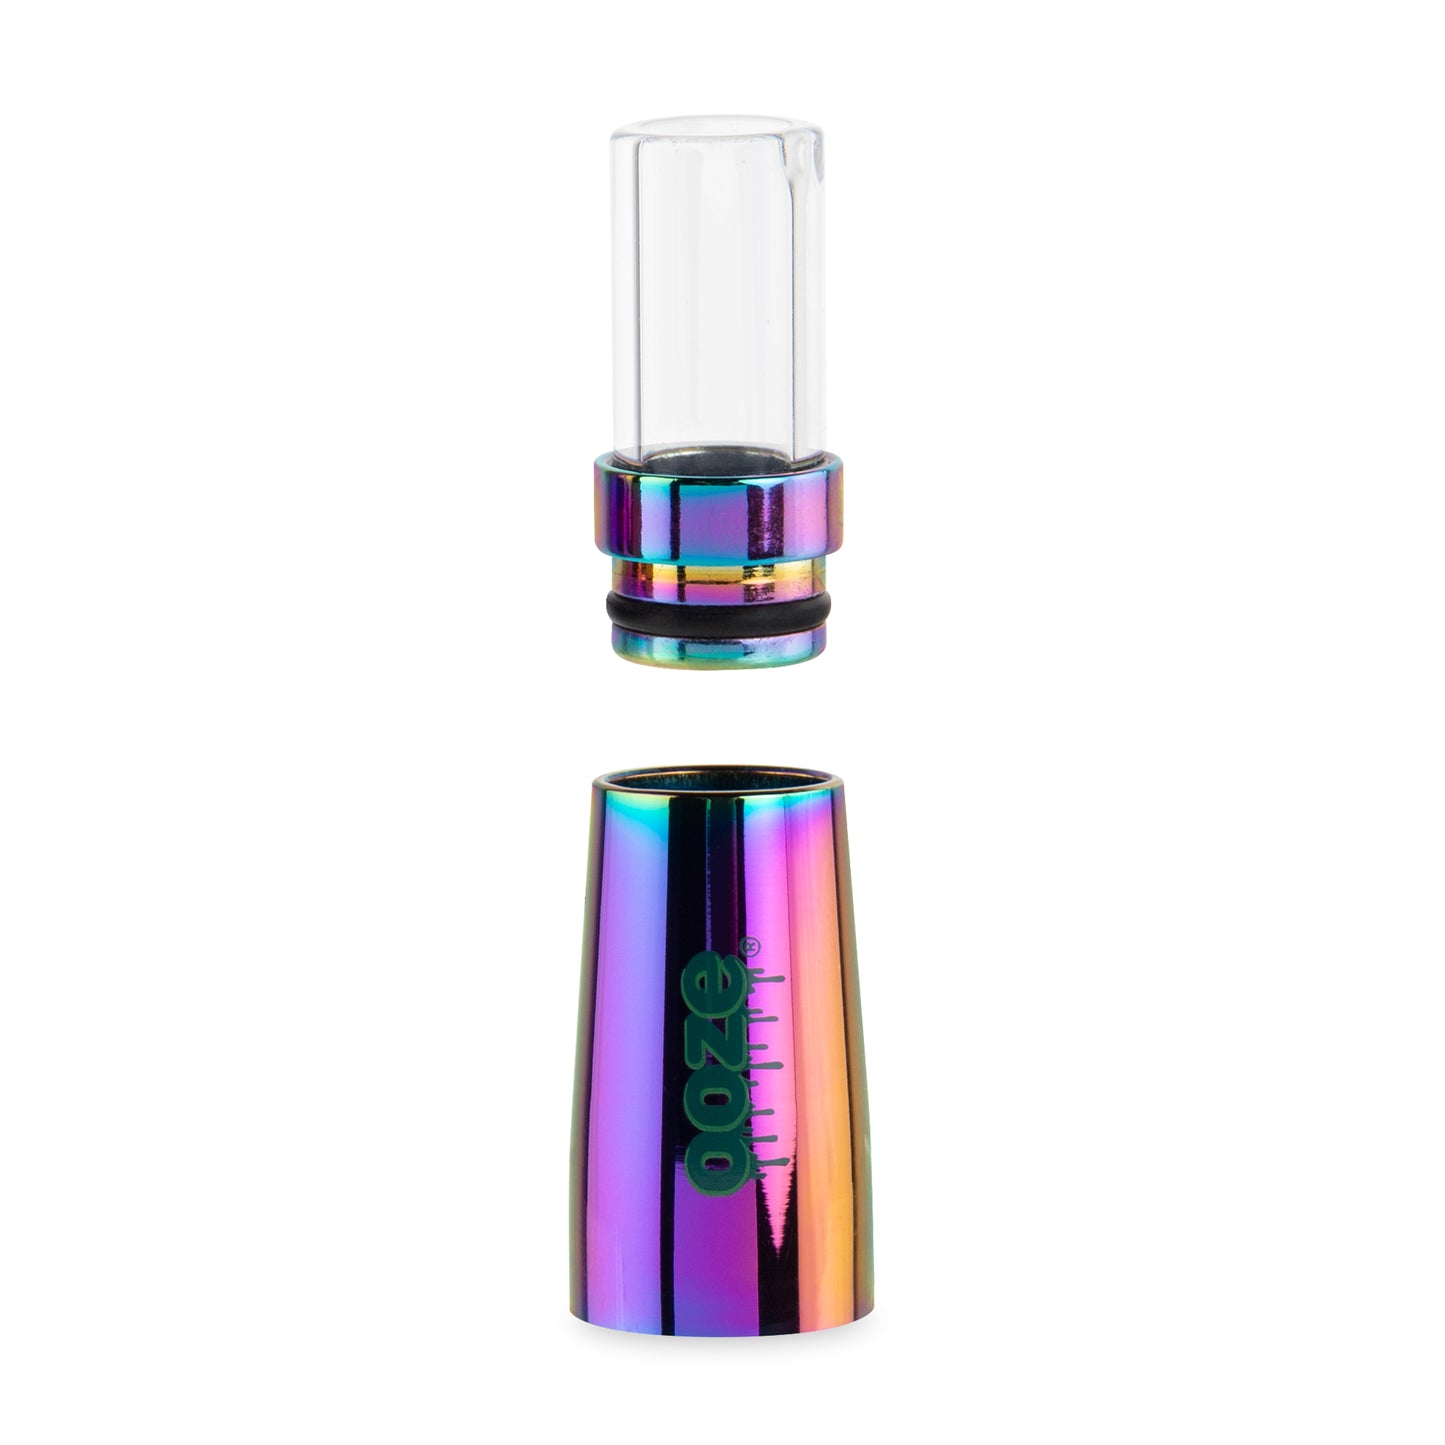 Ooze Fusion Vaporizer Replacement Atomizer 3-Pack + Mouthpiece - Rainbow